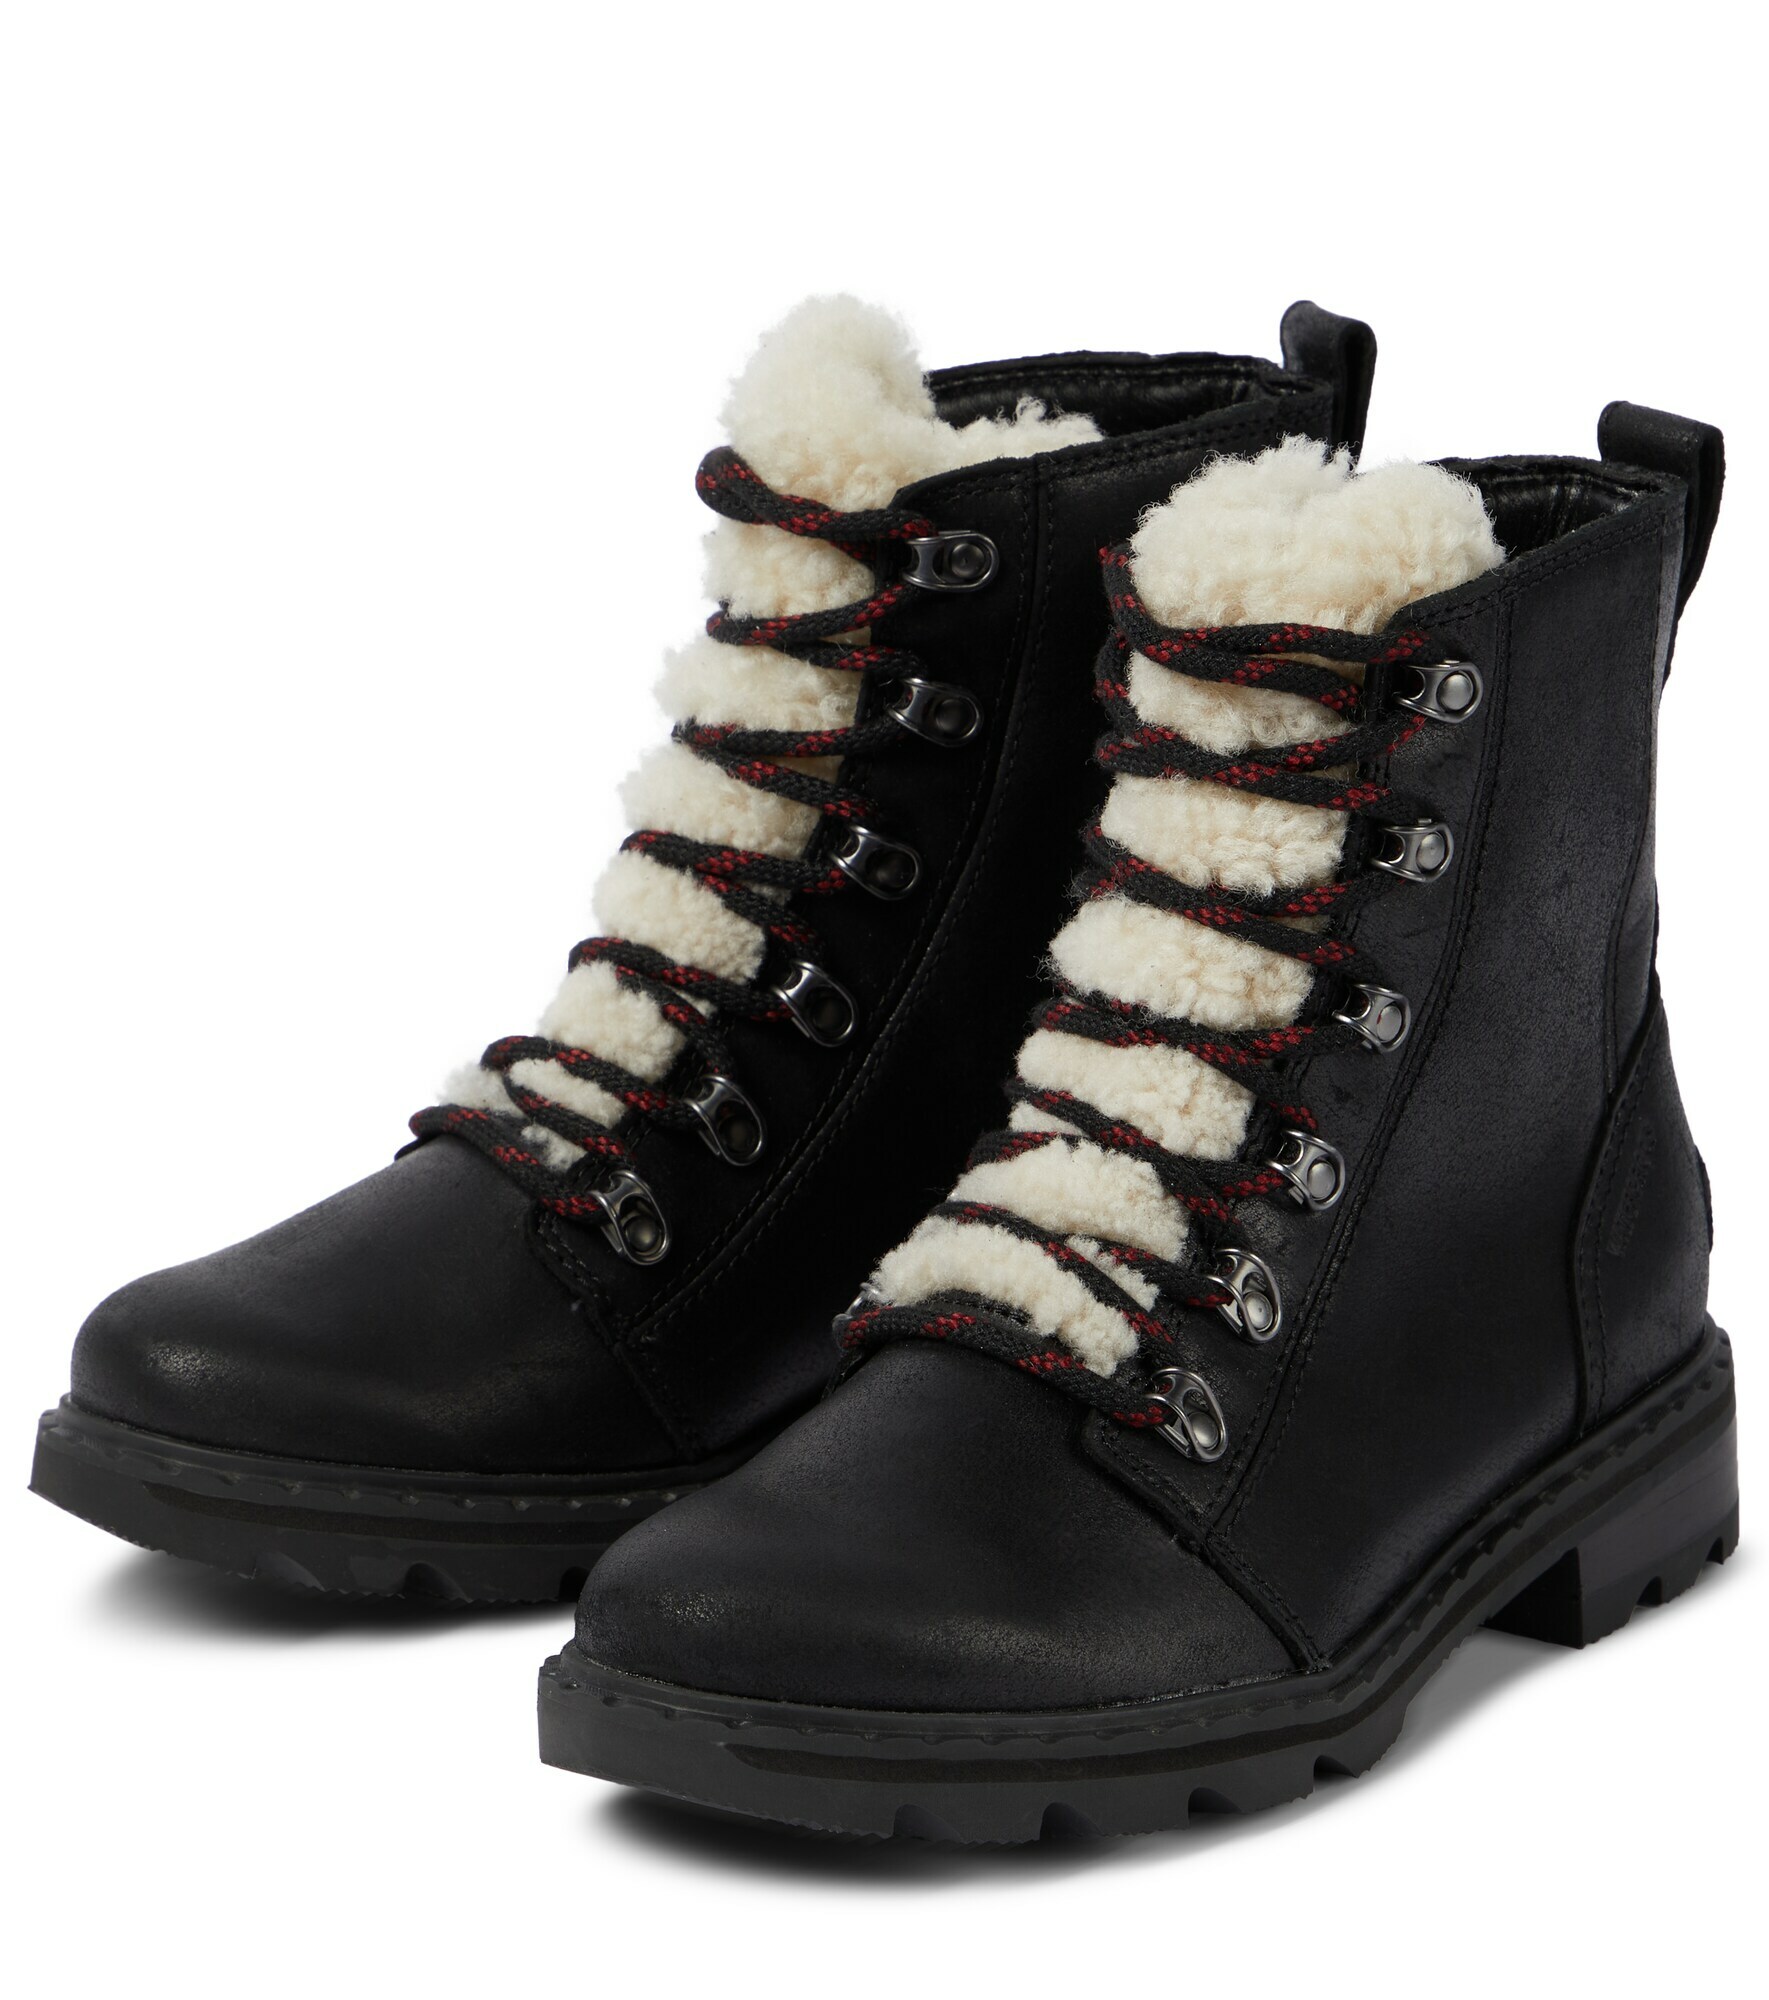 Sorel - Lennox leather and shearling combat boots Sorel